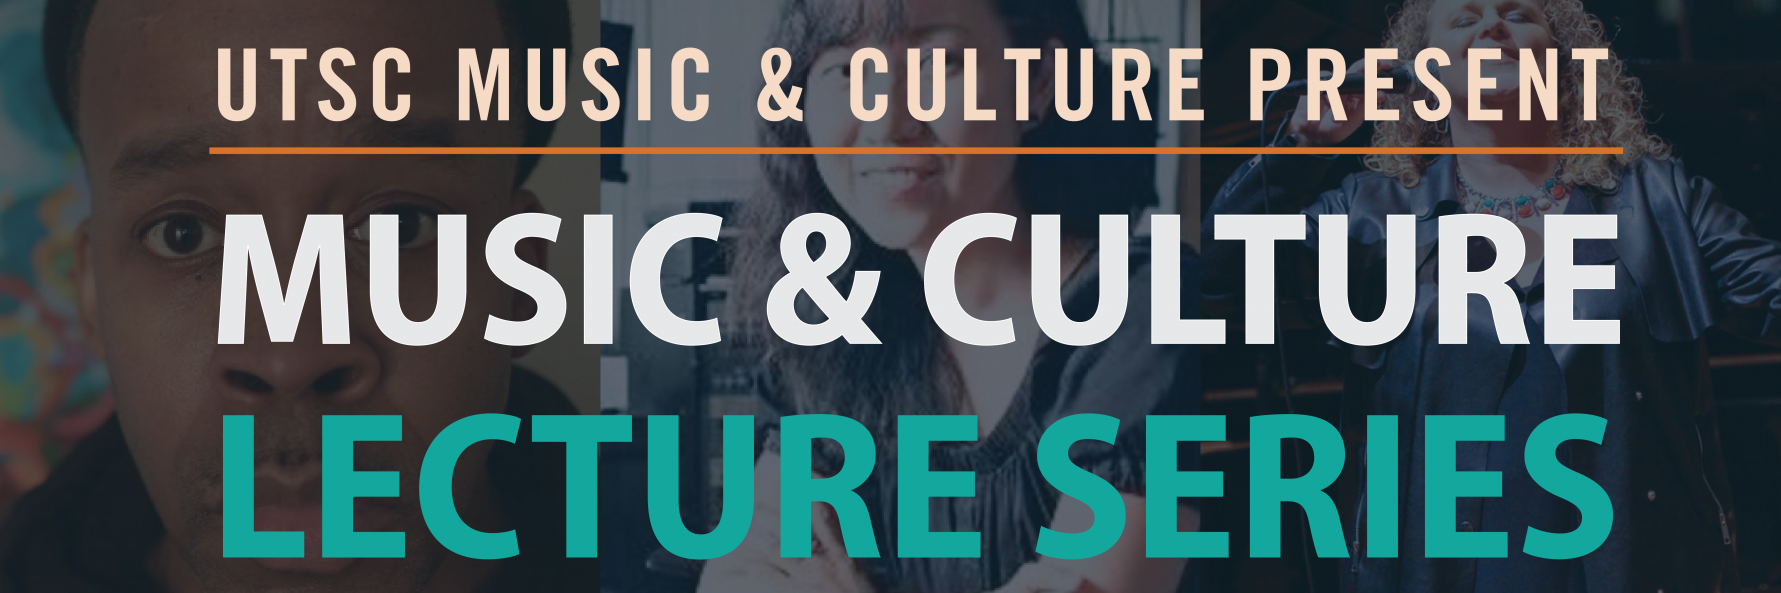 music and culture performance lecture series